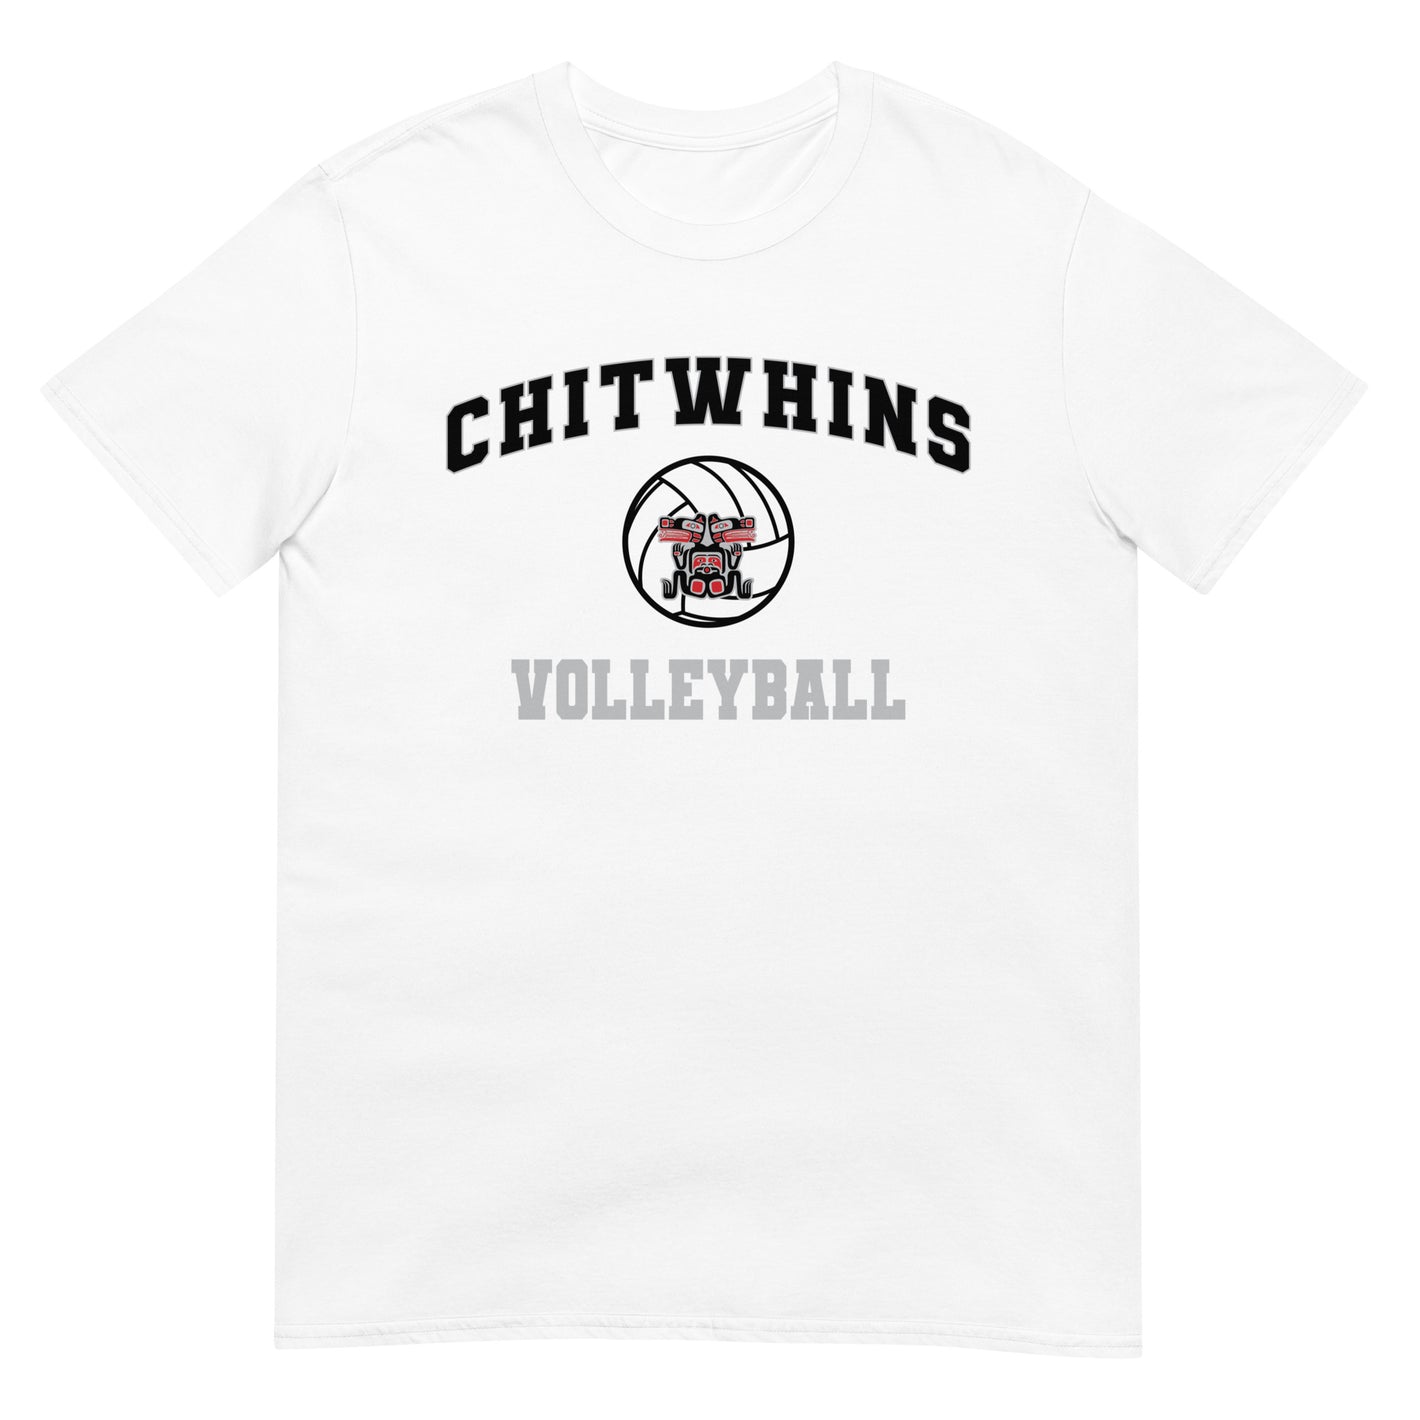 Chitwhins Volleyball Short-Sleeve Unisex T-Shirt